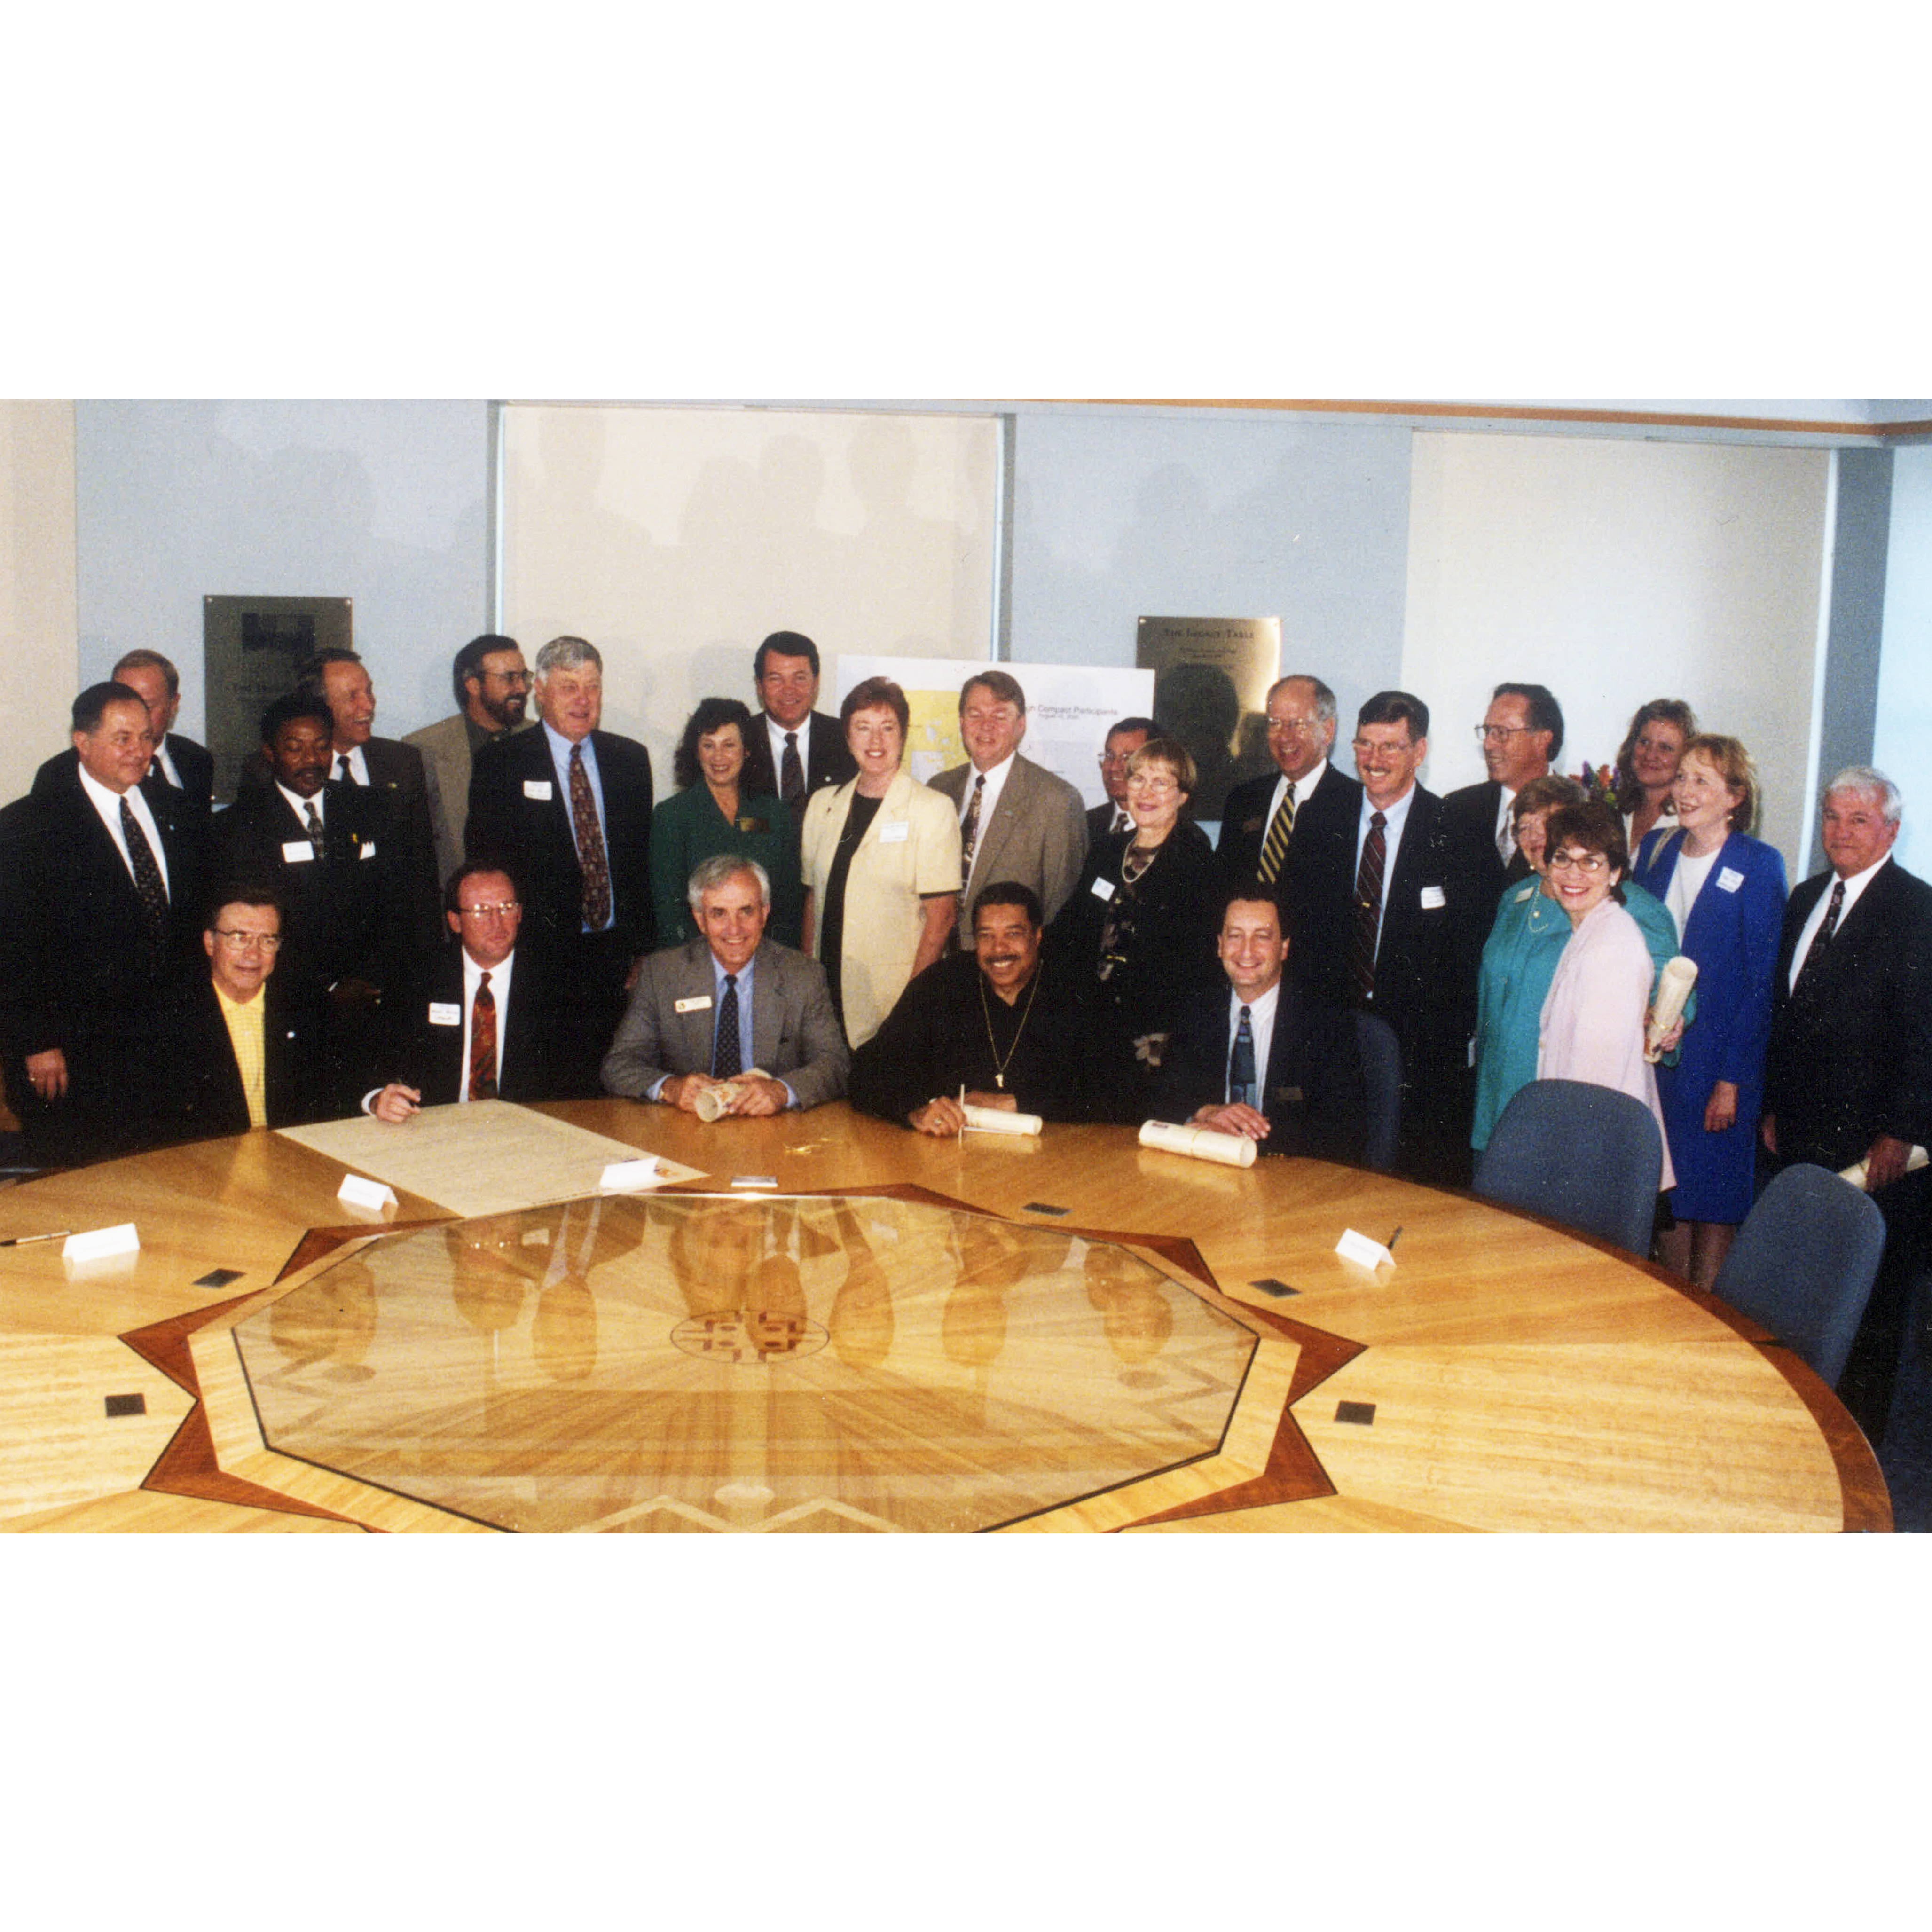 Representatives from five communities and 25 municipalities stand and sit before a large table during the Mile High Compact signing ceremony on August 10, 2000.